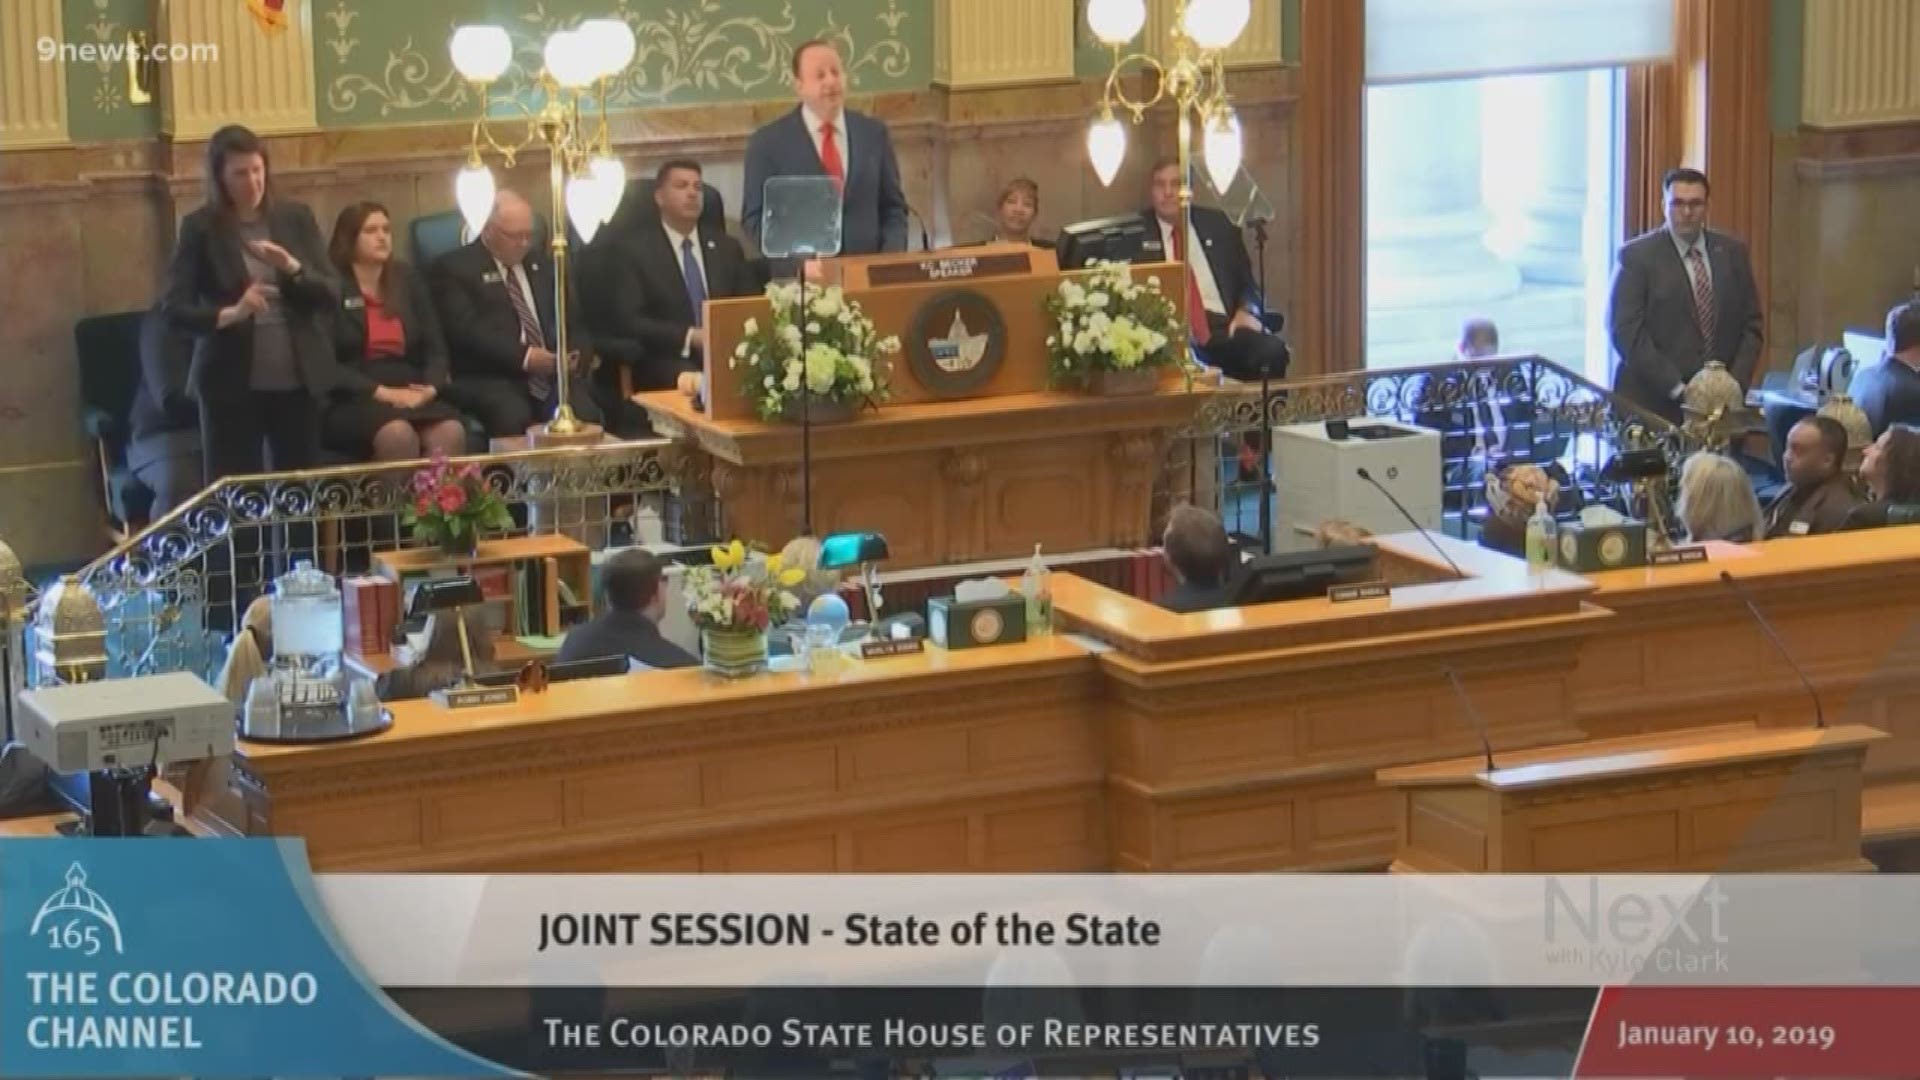 Governor Jared Polis has kept his promise to create a full-day kindergarten program in Colorado - a promise he mentioned throughout his campaign and reiterated in his state of the state address.